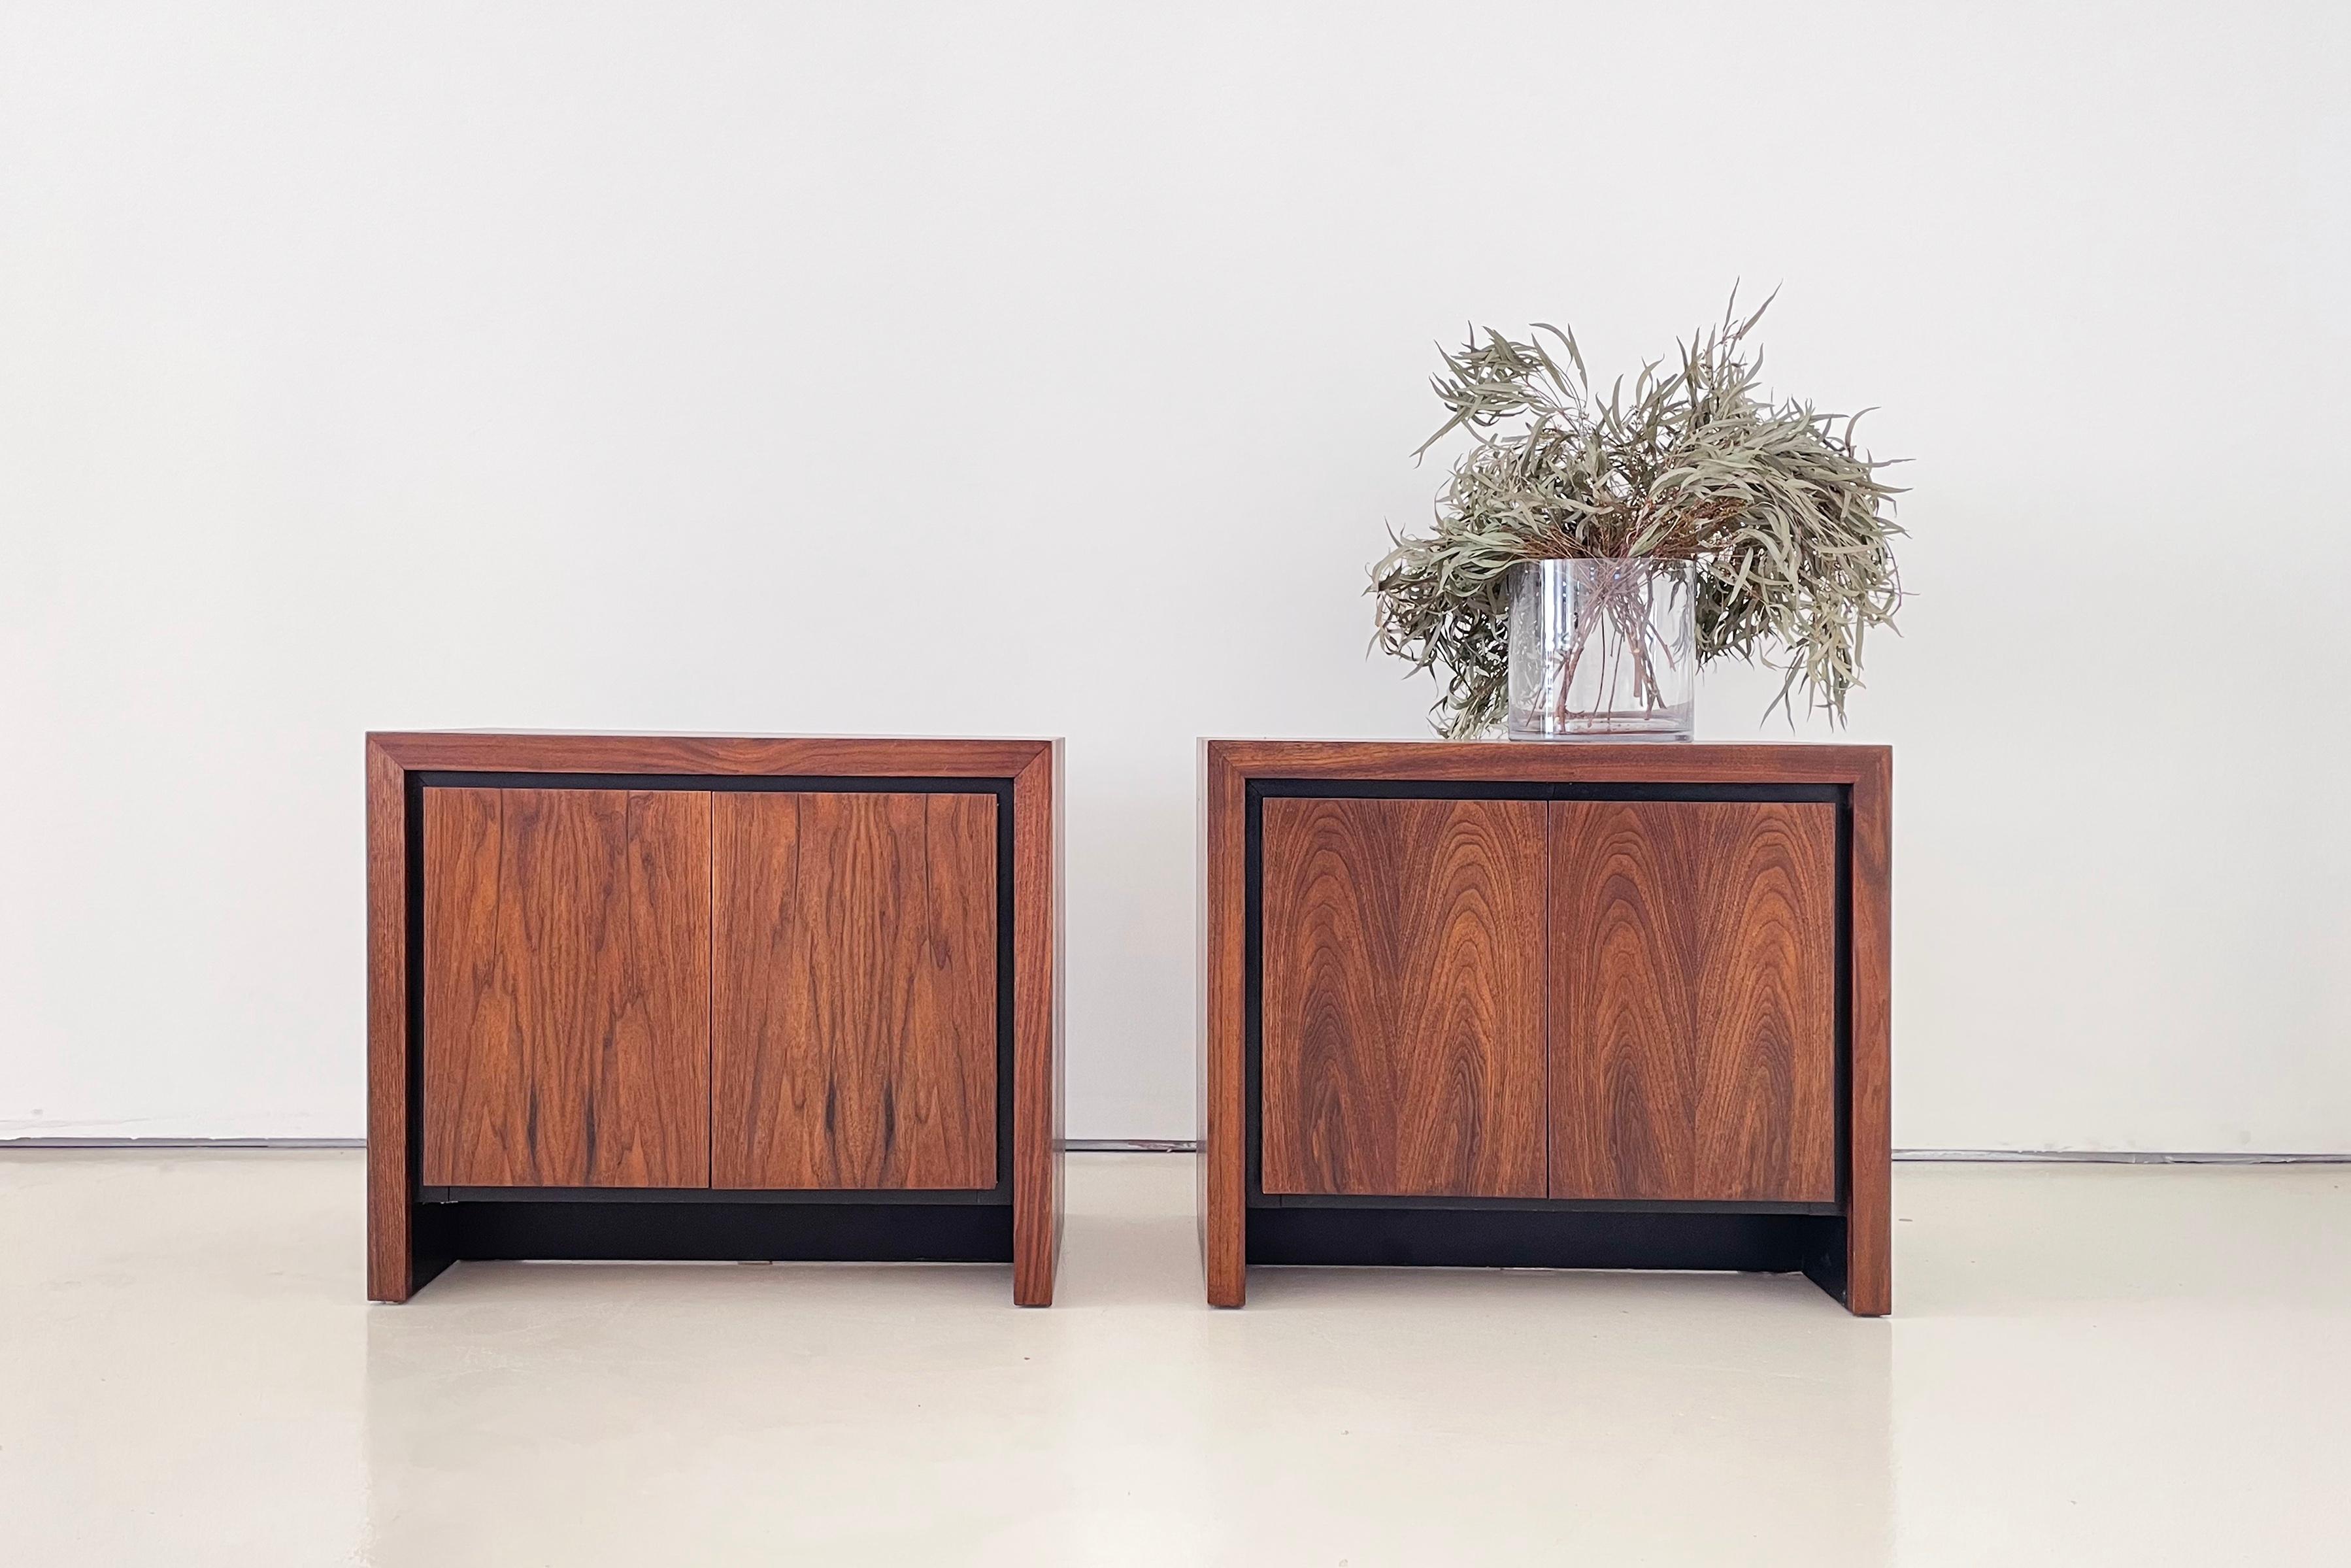 Originally manufactured in the 1970s by Dillingham

Exceptionally book-matched Walnut venner

No structural issues, minor wear.

Please note, this collection has the black laminate in the recessed area surrounding the drawers and on the recessed